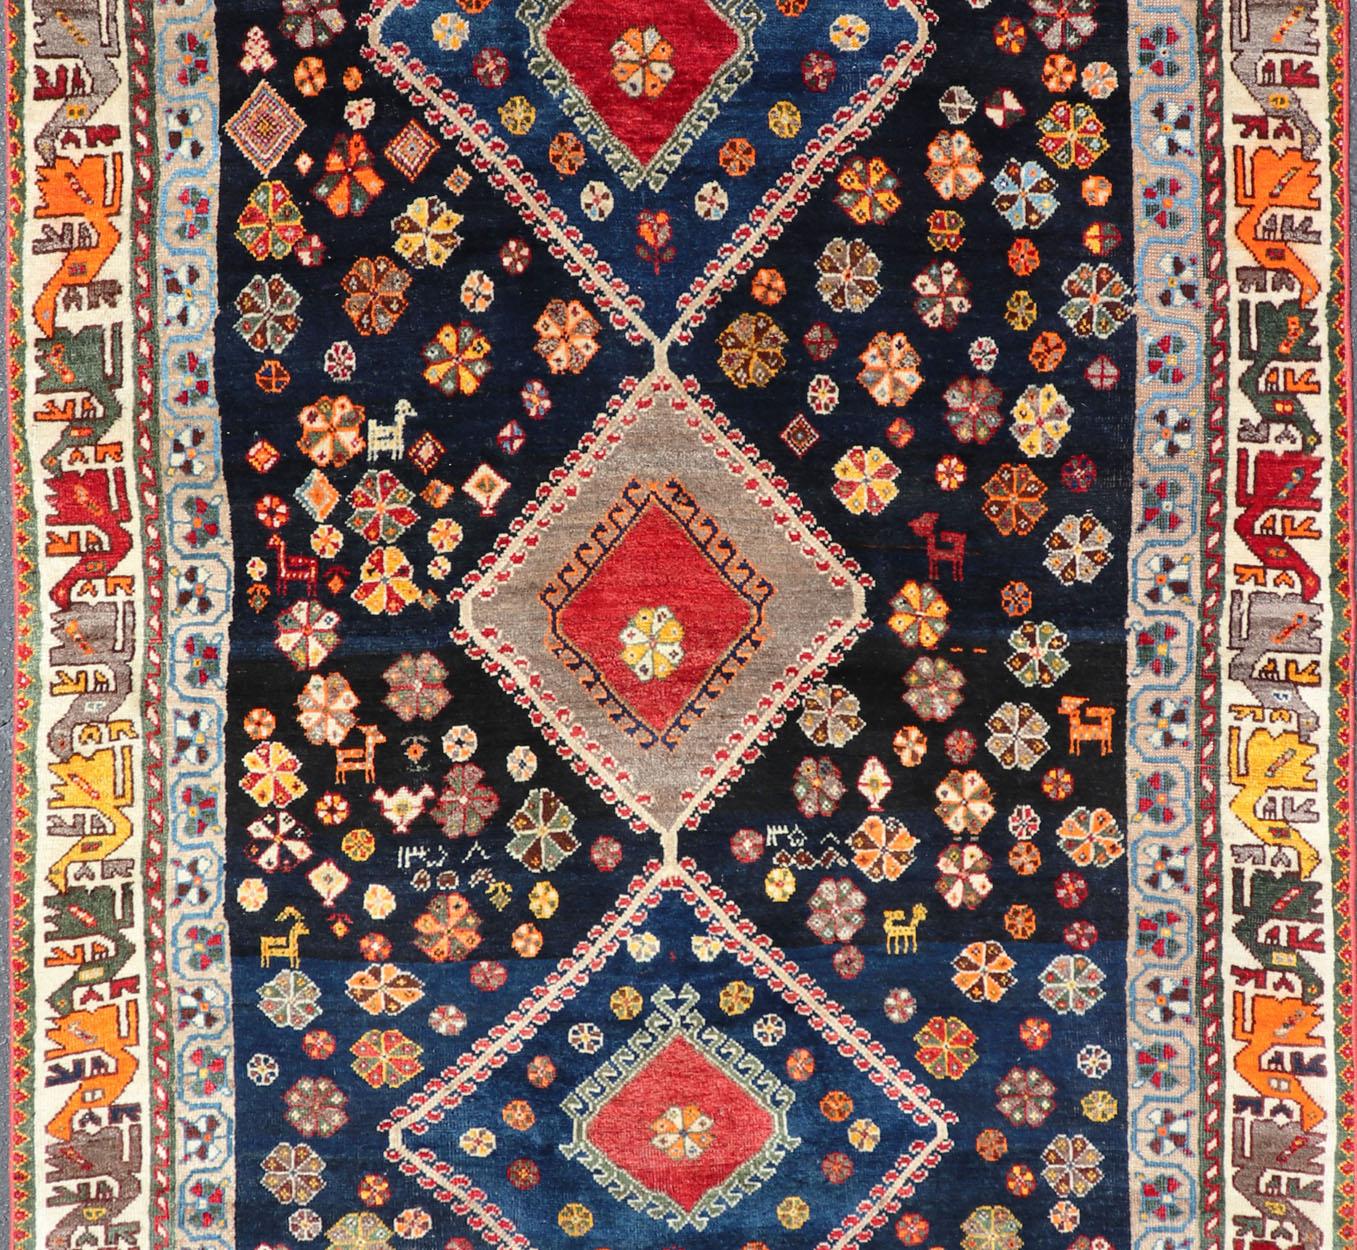 Hand-Knotted Vintage Persian Tribal Shiraz with Medallion Design on Dark Background